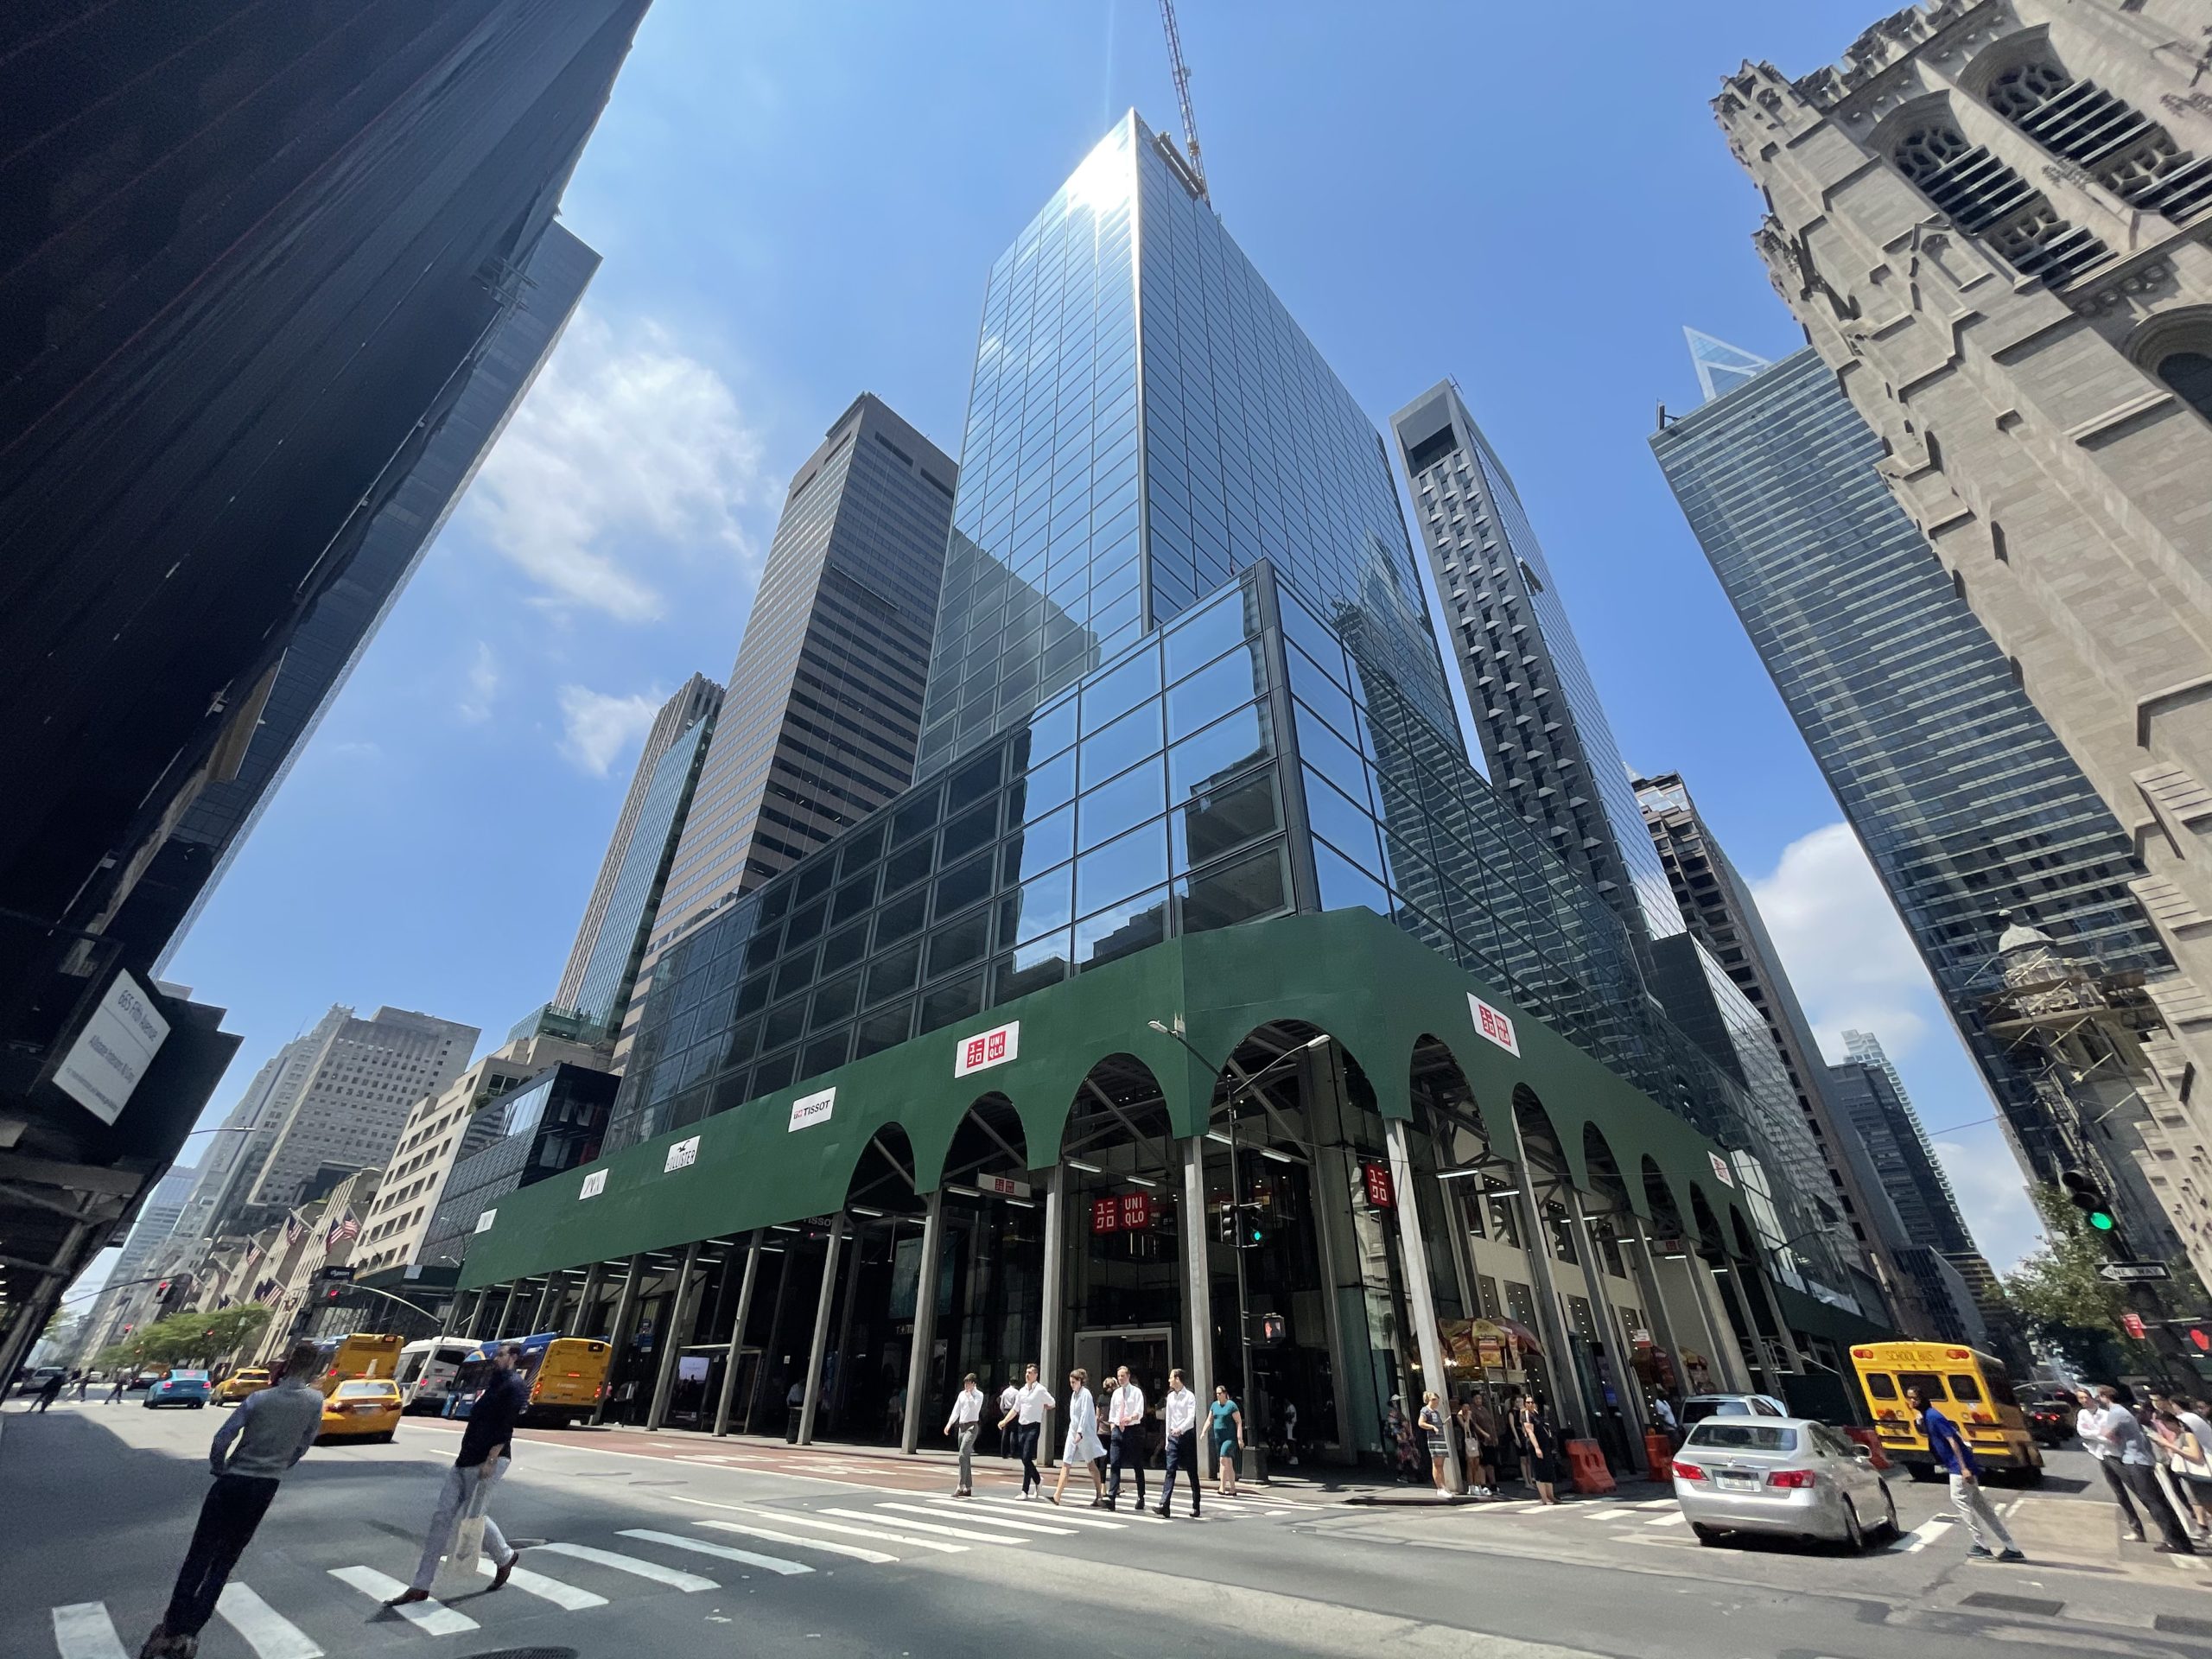 660 Fifth Avenue's New Curtain Wall Reaches Roof Parapet in